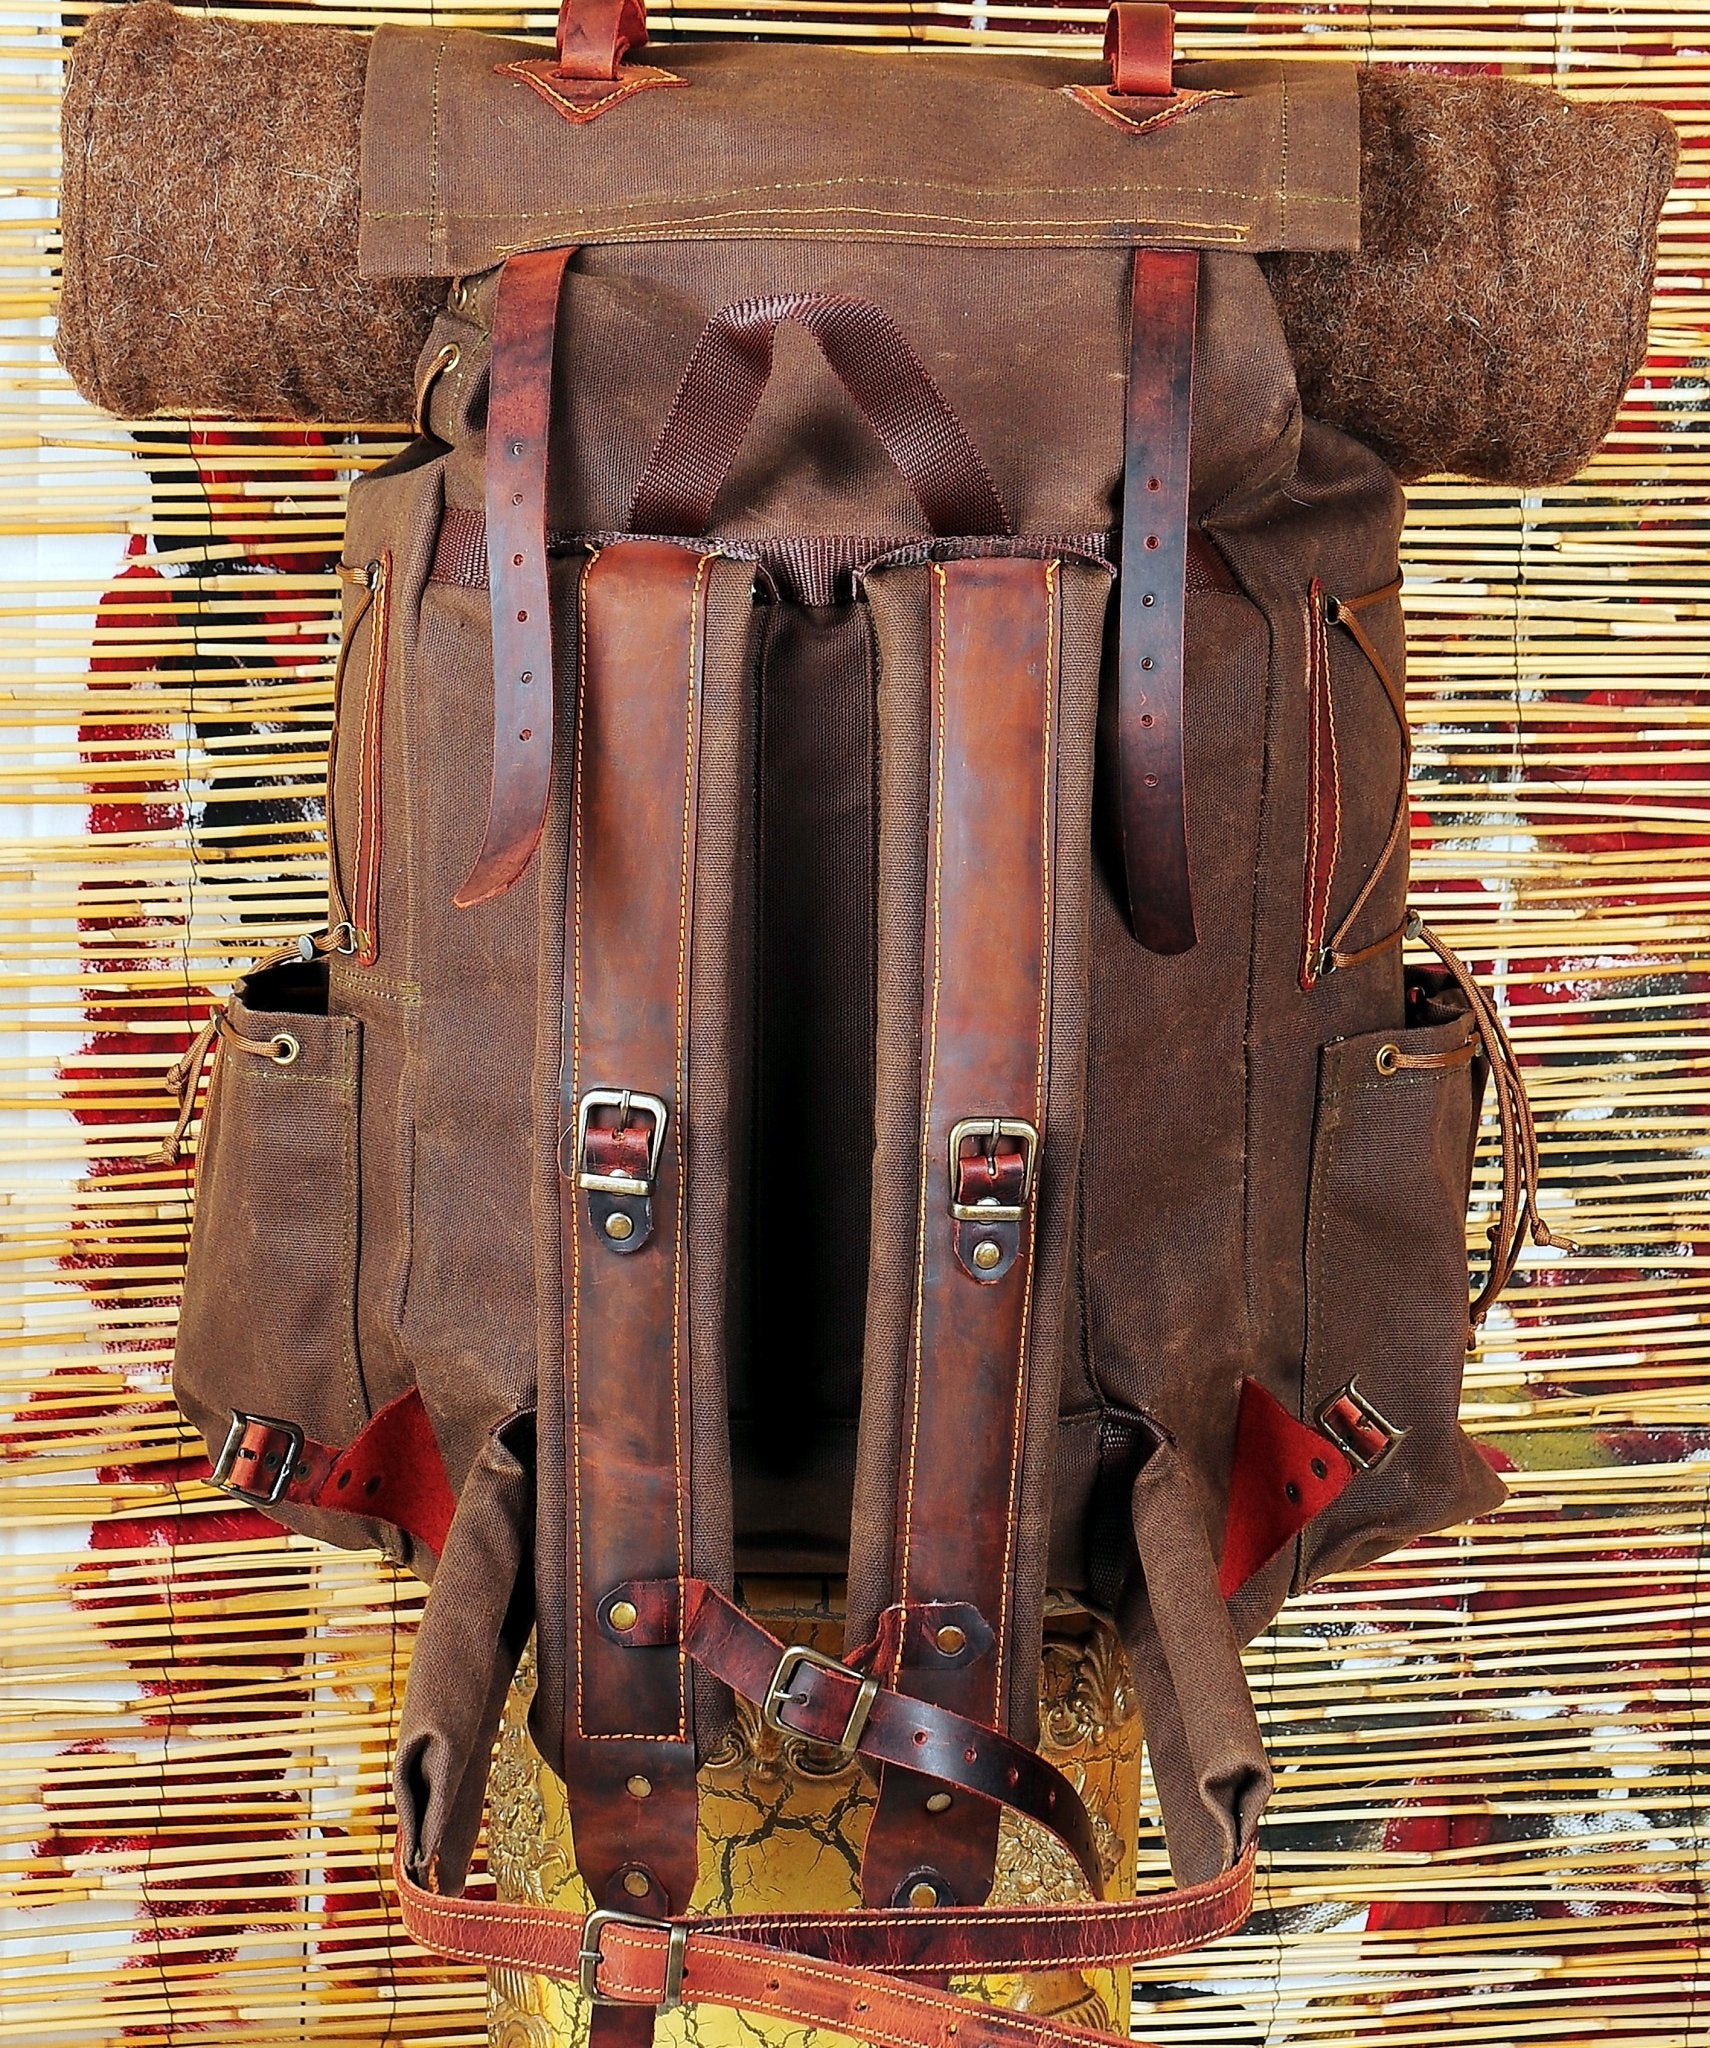 30L to 50L | Bushcraft Backpack | Brown, Green, Dhaki Colours | Handmade Leather, Waxed Canvas Backpack for Travel-Camping | Personalization bushcraft - camping - hiking backpack 99percenthandmade   